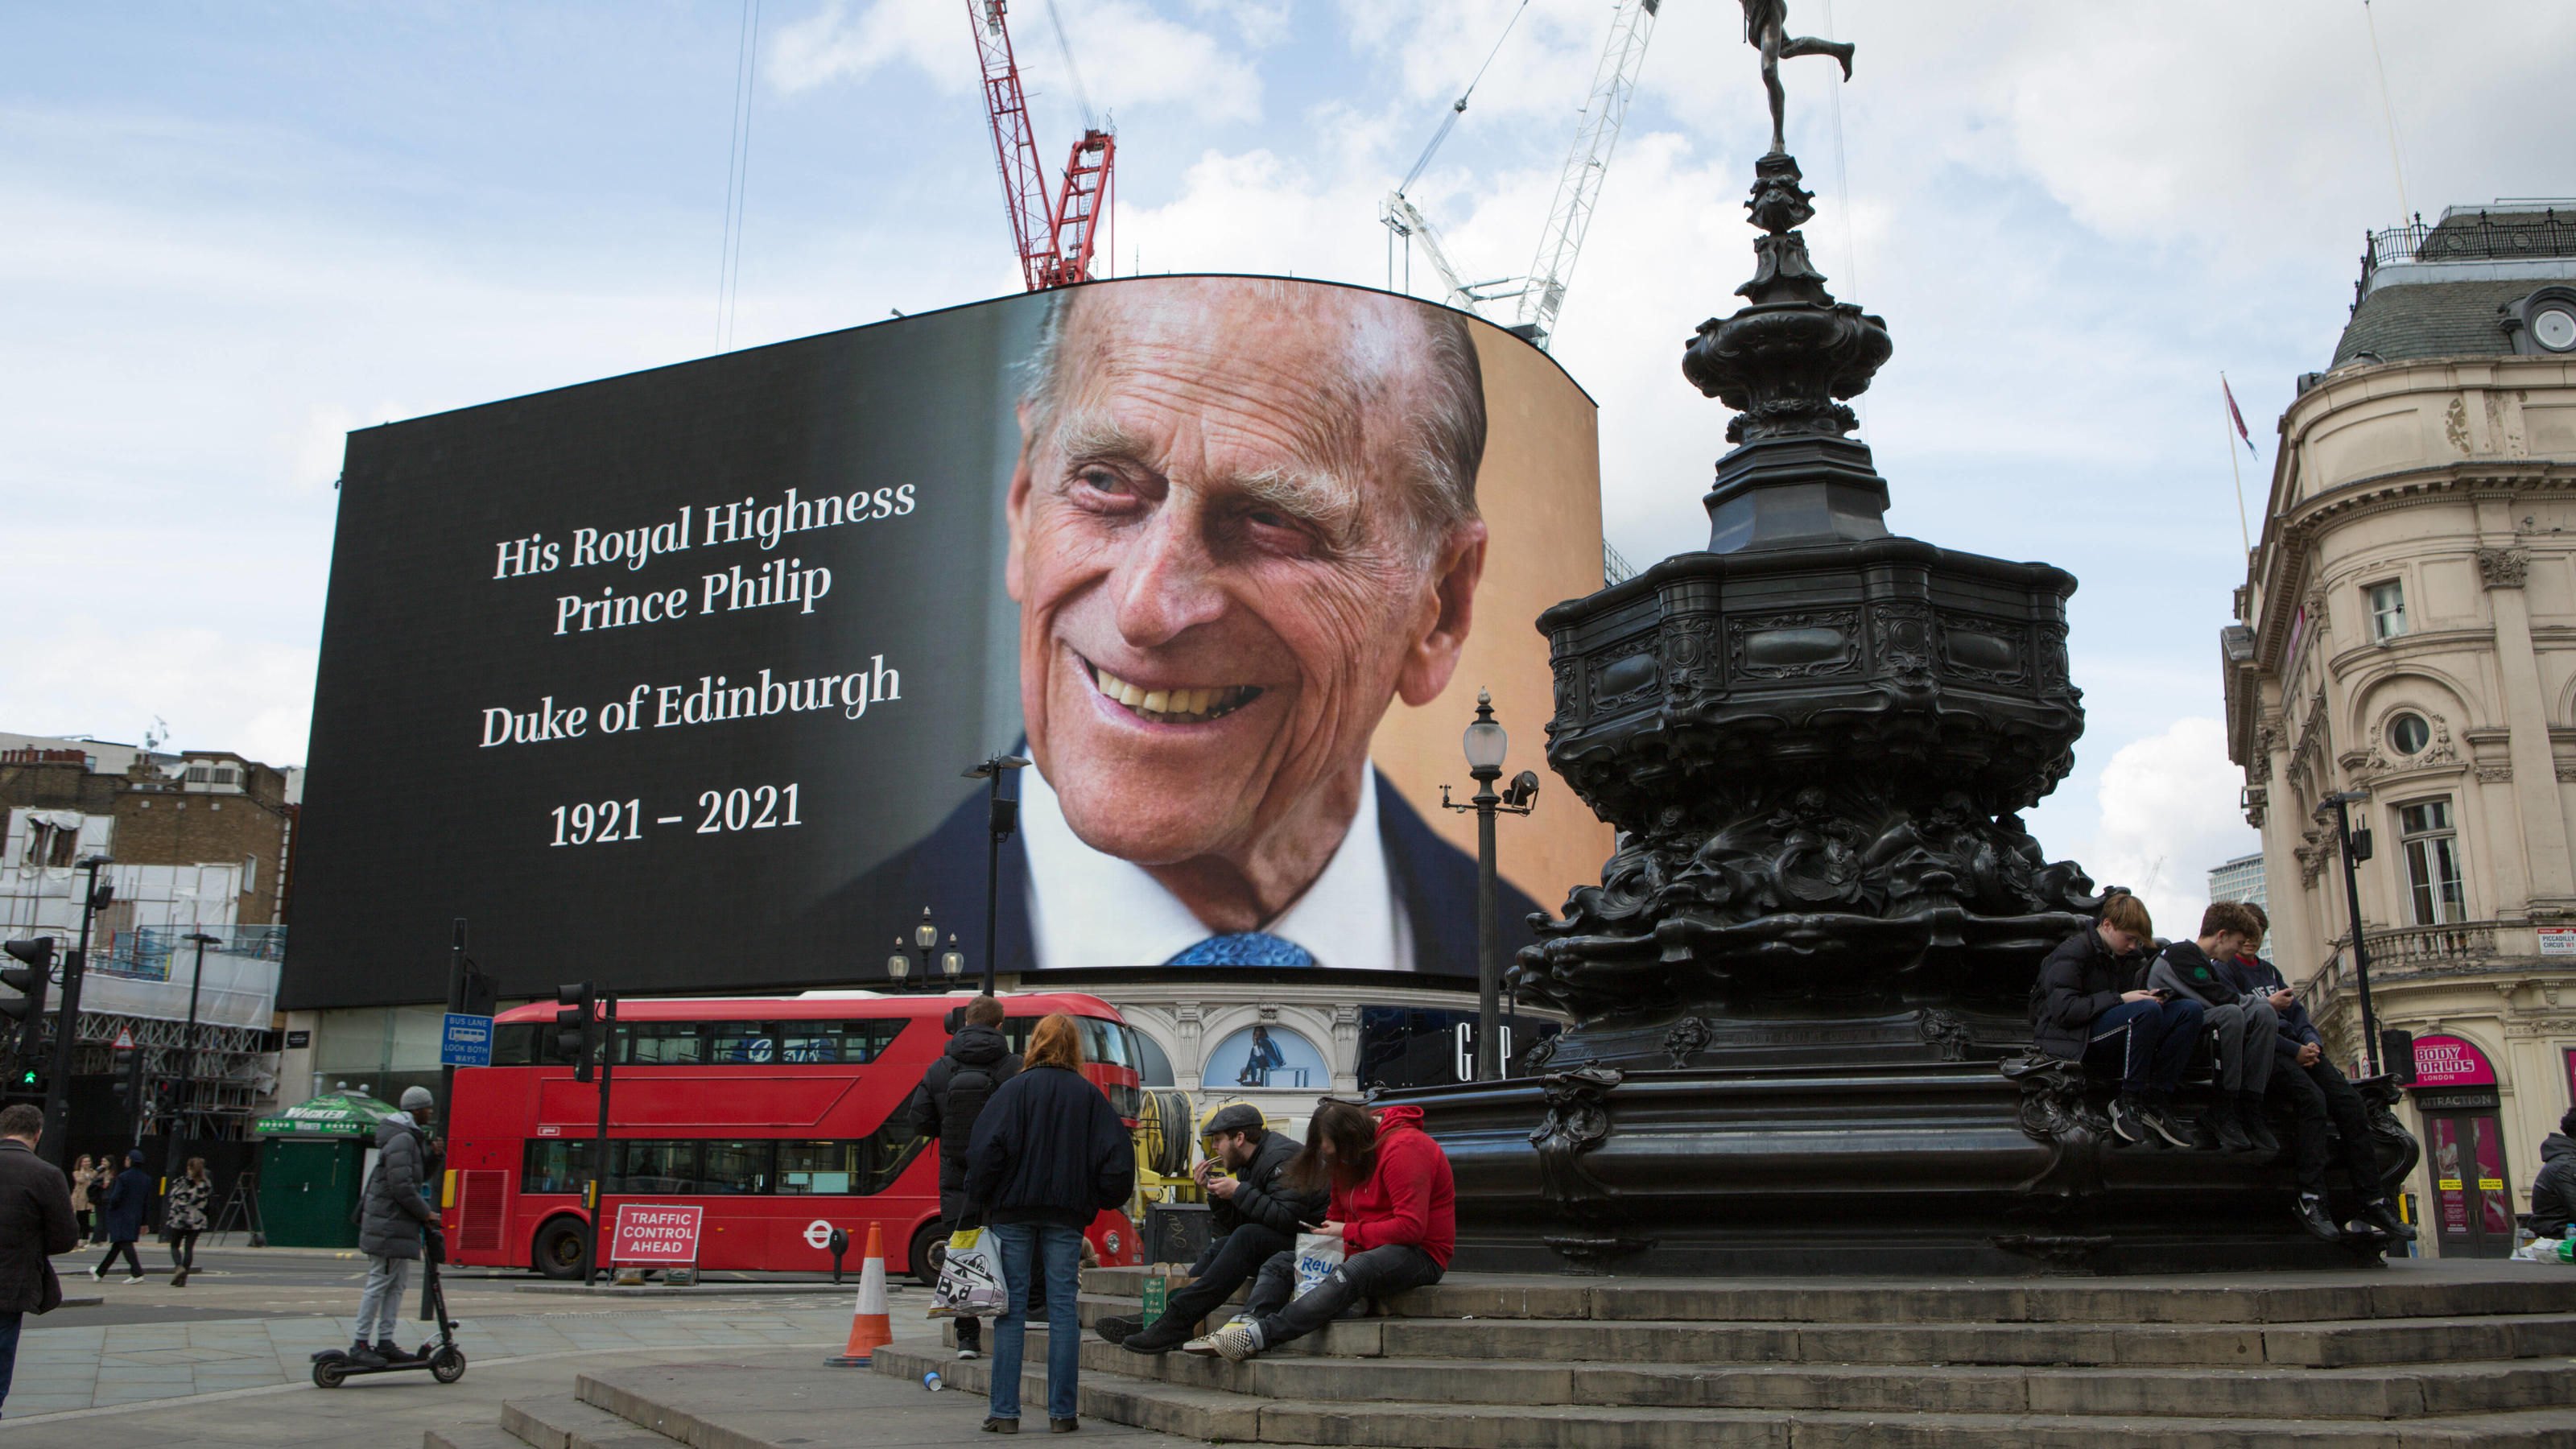 April 9, 2021, London, United Kingdom: Piccadilly Circus Billboard Bears the Prince Philip Picture..The world-renowned landmark that is the Piccadilly Circus advertising billboard in central London displayed a tribute to Prince Philip on Friday eveni